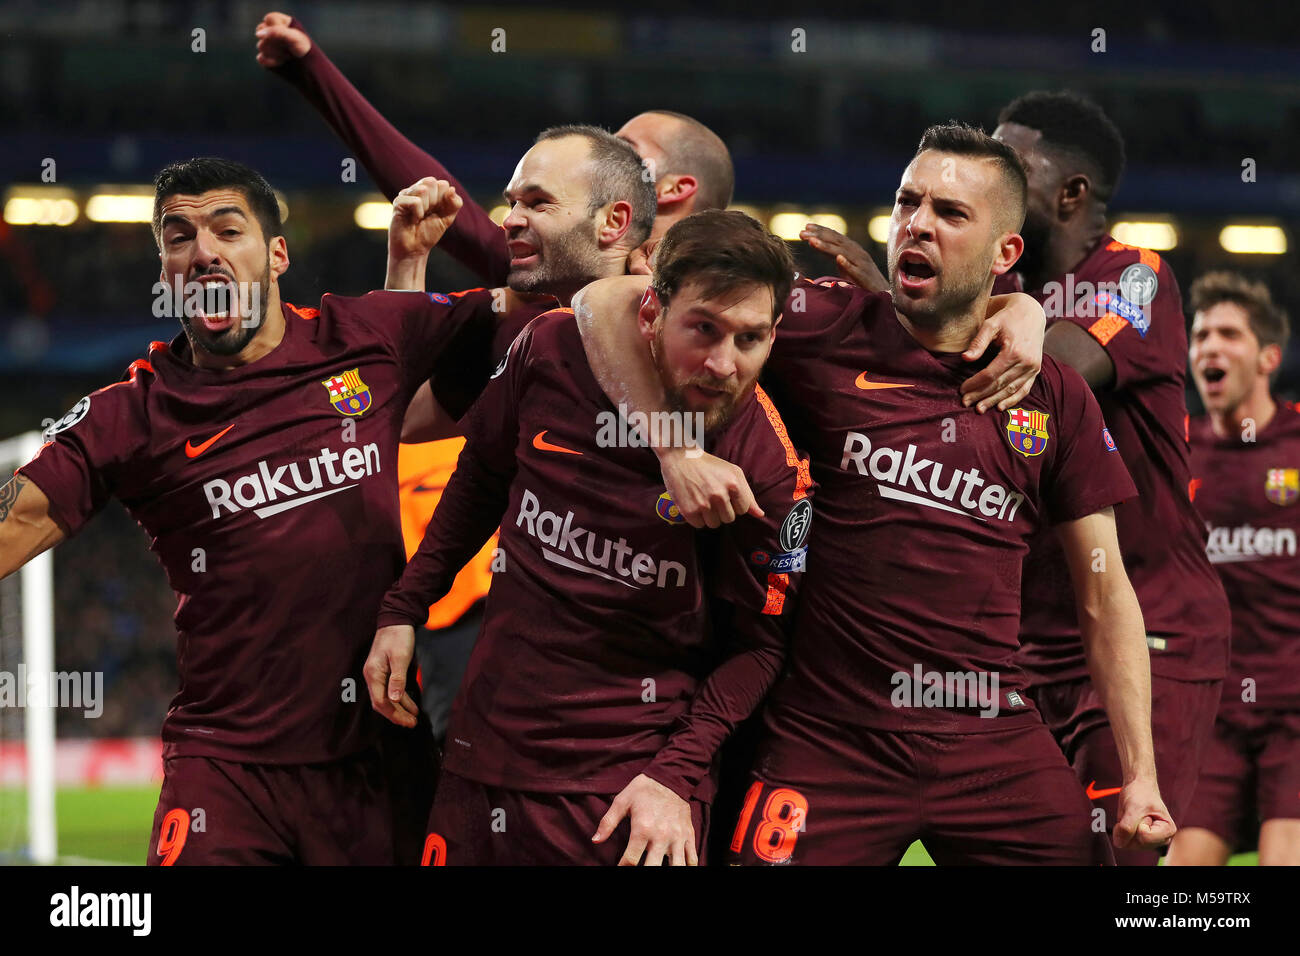 London, UK. 20th February, 2018. Lionel Messi of Barcelona is congratulated after scoring the equalising goal, making it 1-1- Chelsea v Barcelona, UEFA Champions League, Round of 16, 1st Leg, Stamford Bridge, London - 20th February 2018. Credit: Richard Calver/Alamy Live News Stock Photo